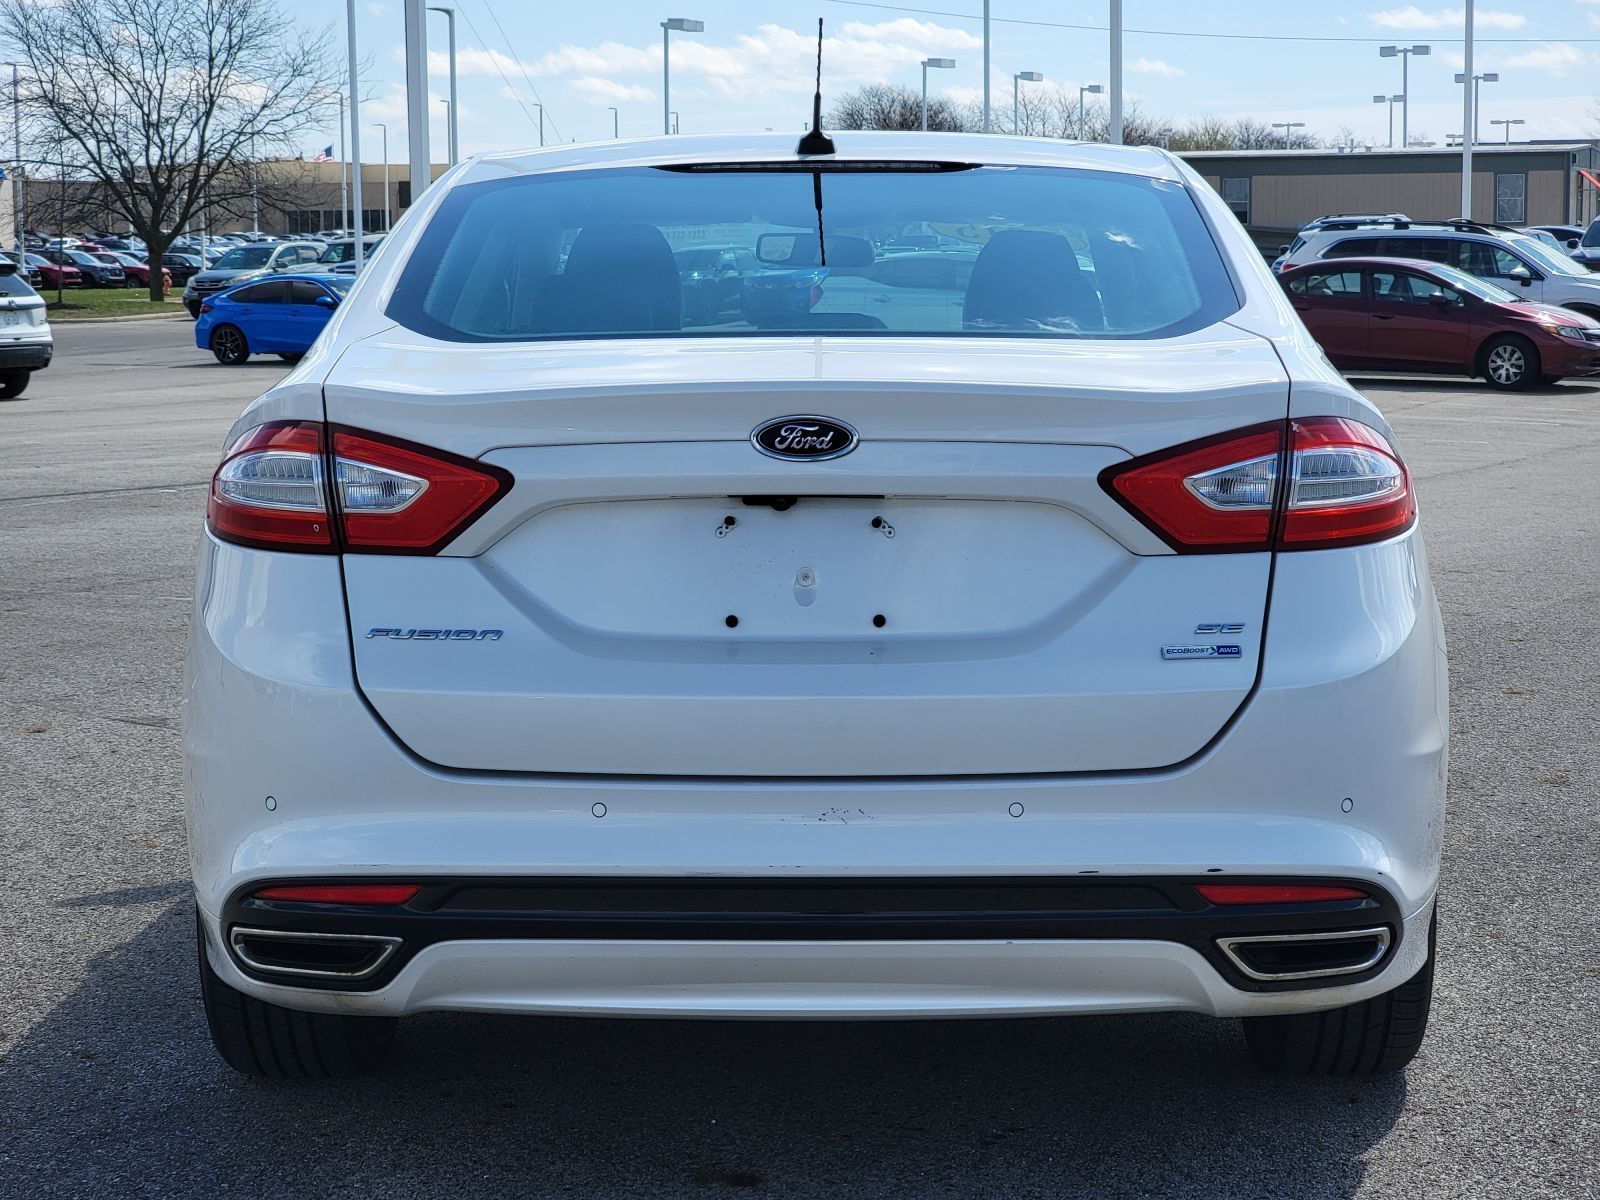 Used, 2015 Ford Fusion SE, White, 13946-14